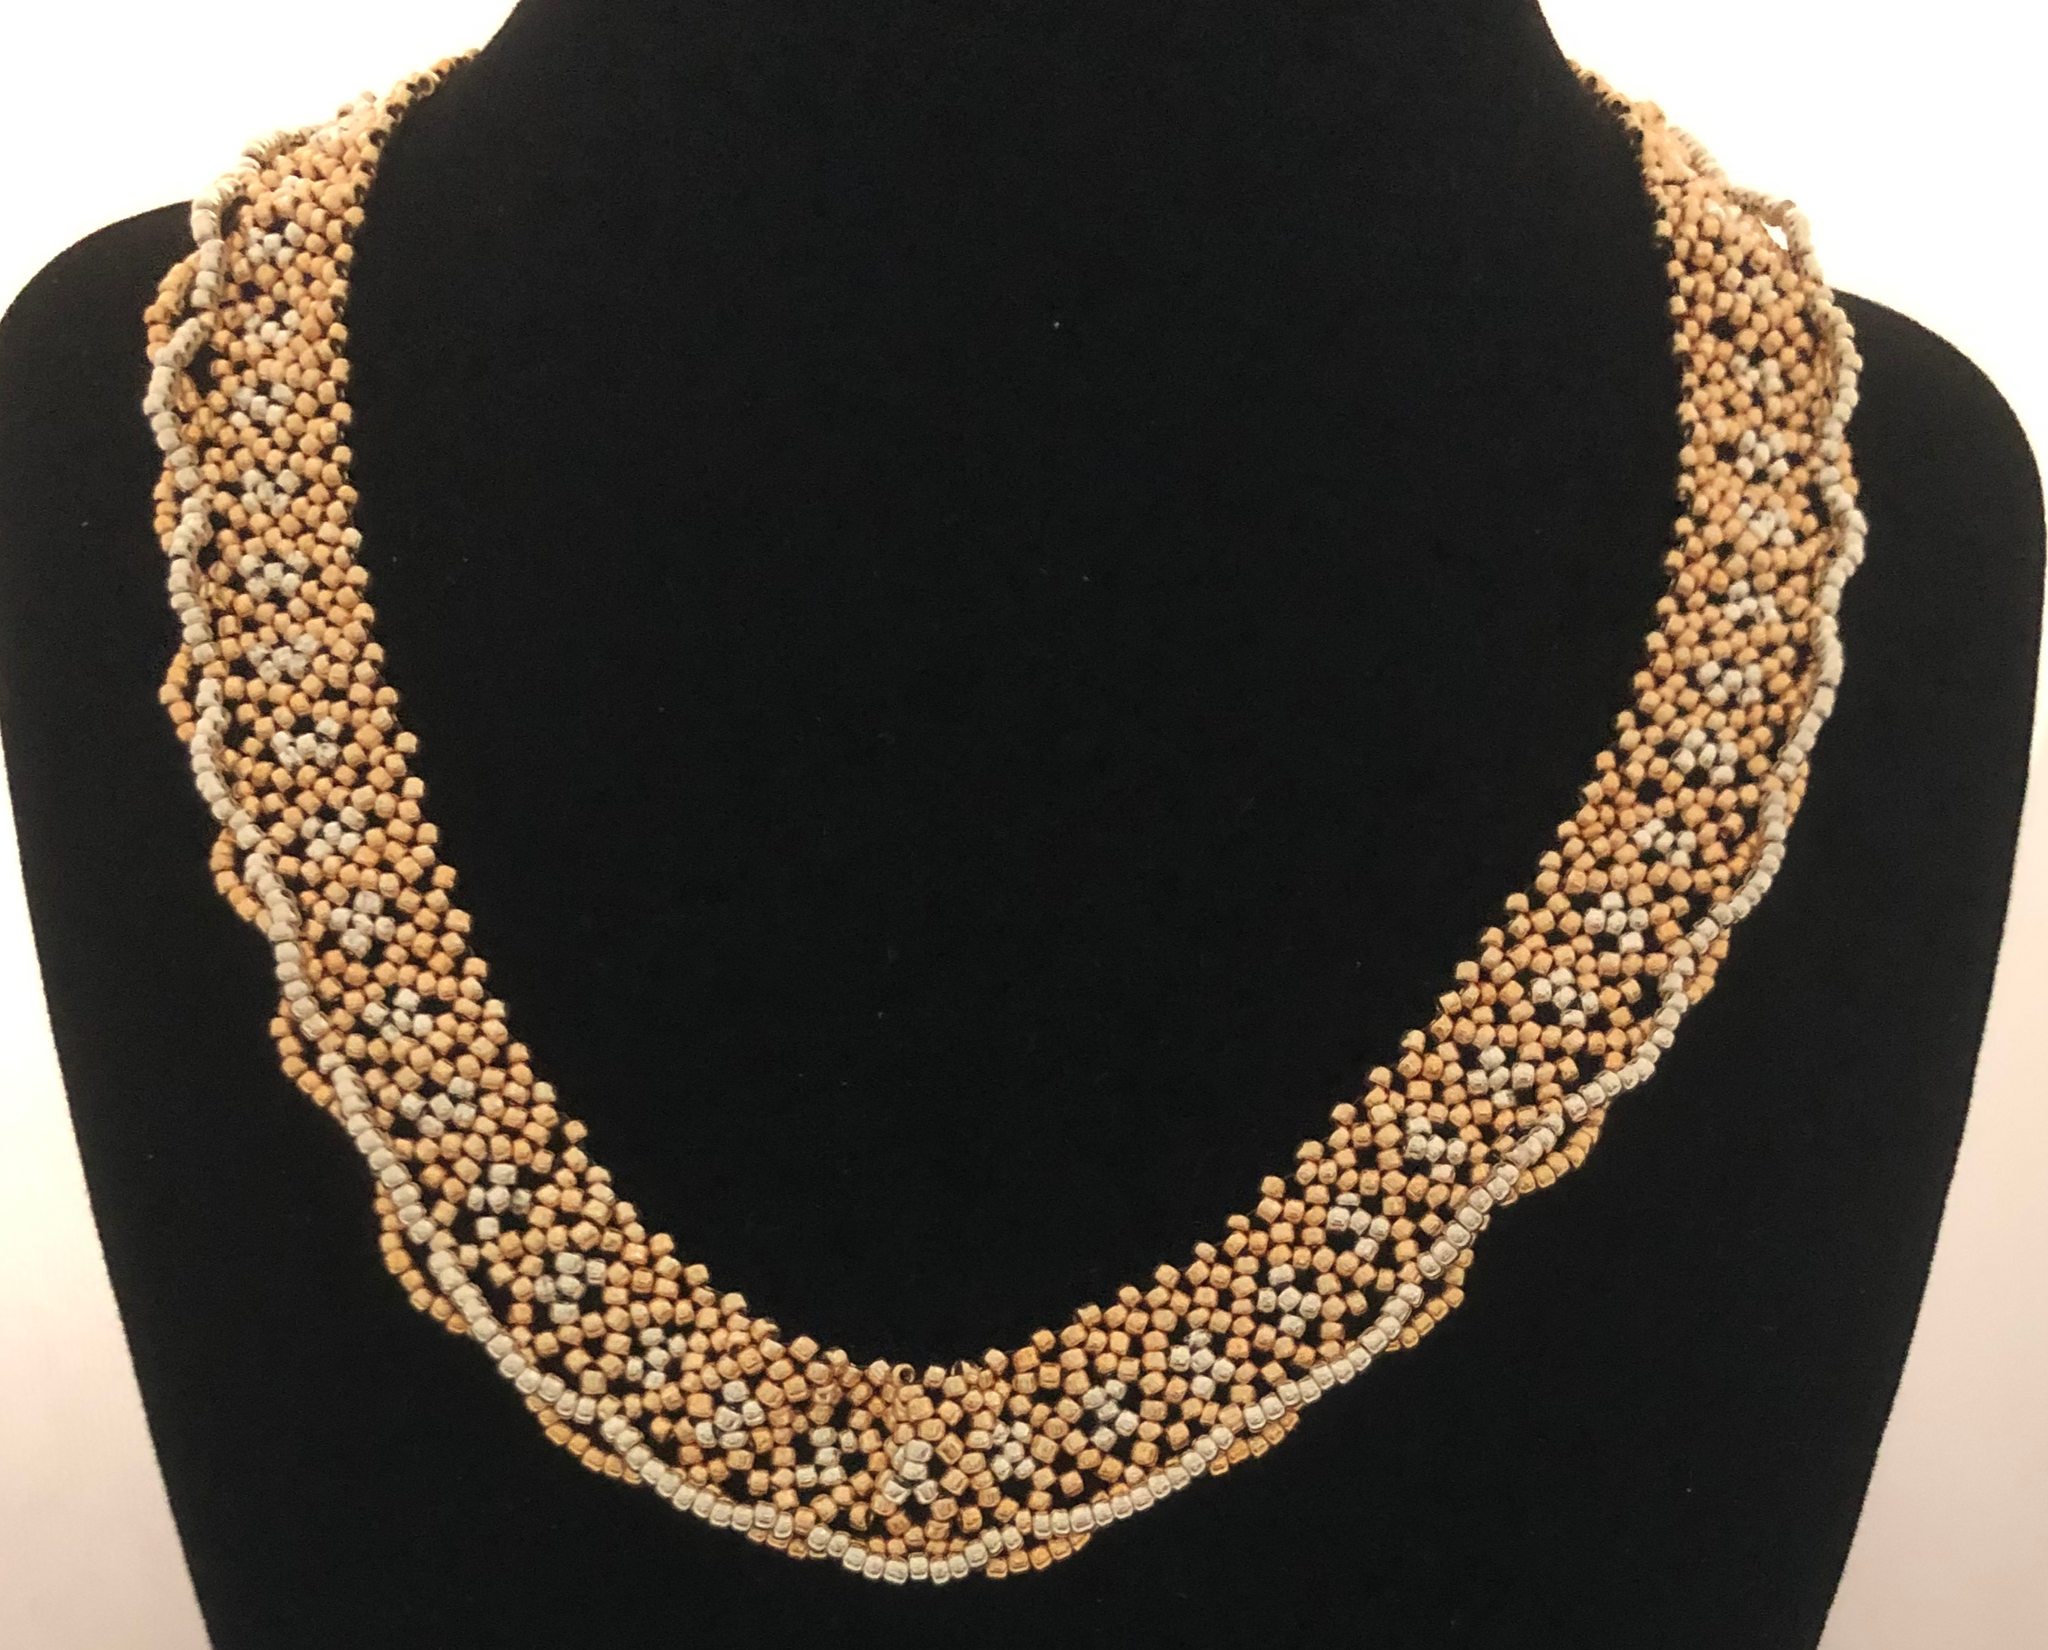 Scalloped Lace Necklace